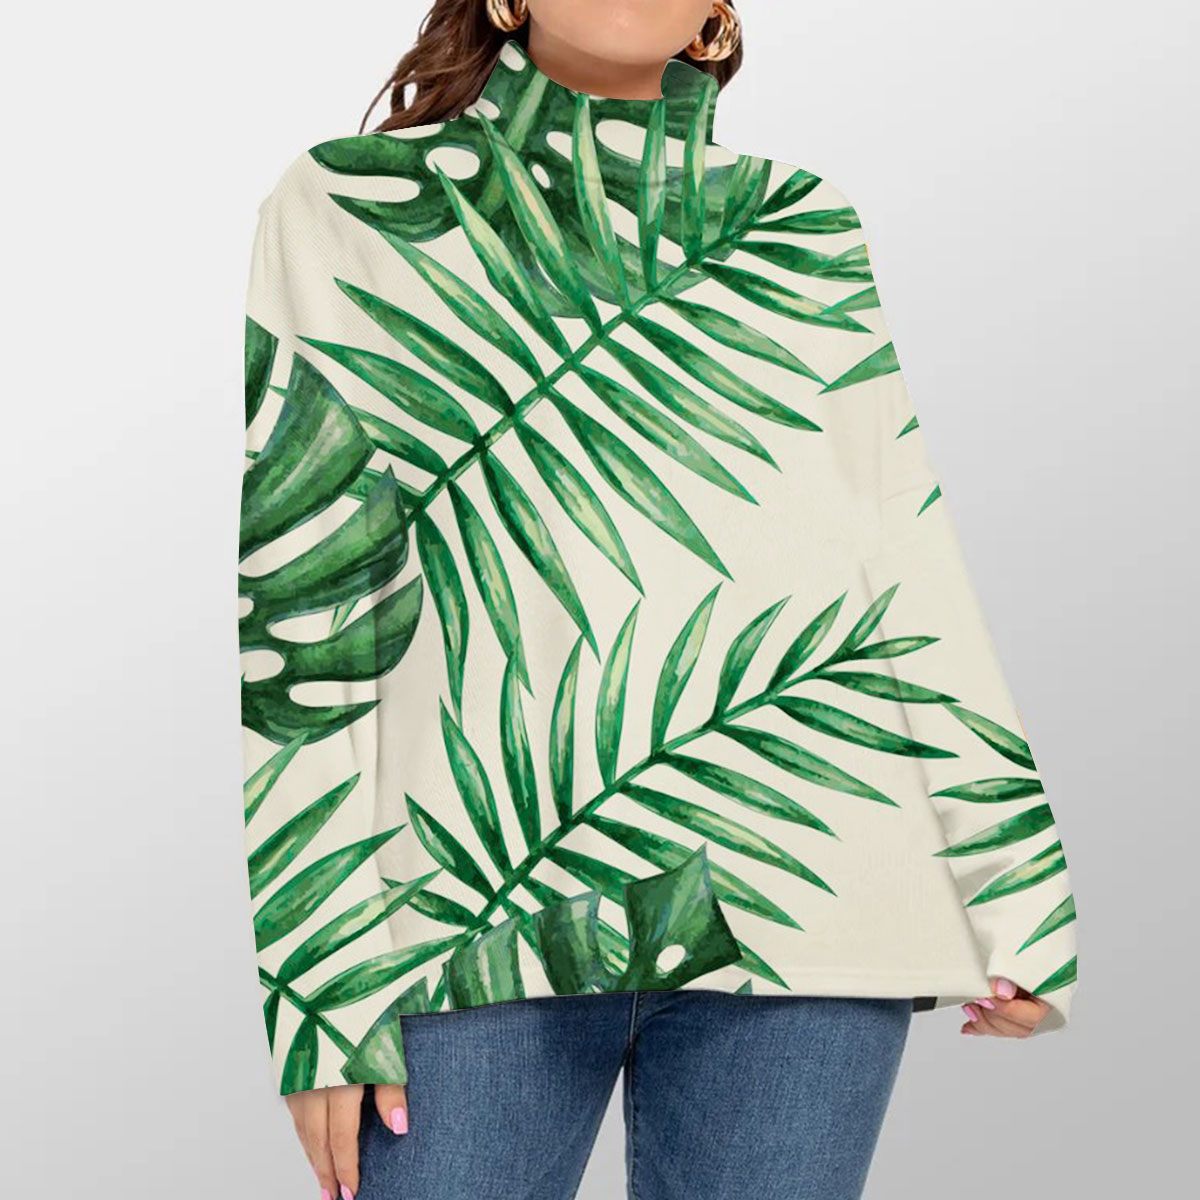 Watercolor Tropical Palm Leaves Turtleneck Sweater